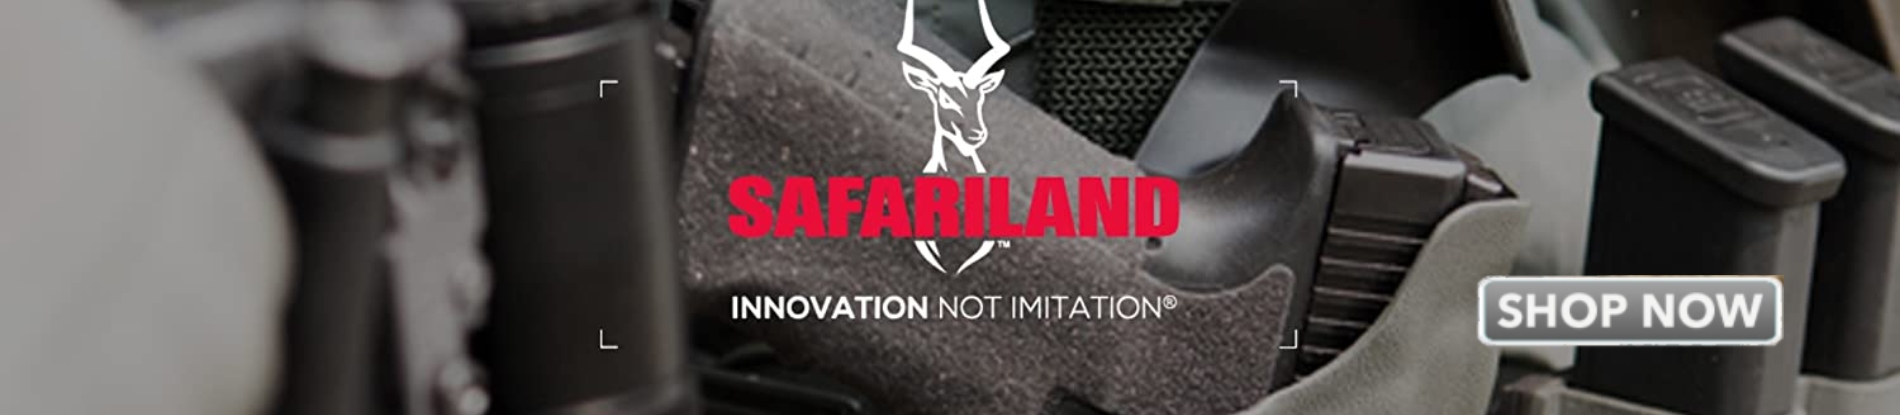 Buy/Shop Safariland Mounting Systems – Safariland Online in NS – Uniform  Works - an Authorized Distributor of The Safariland Group